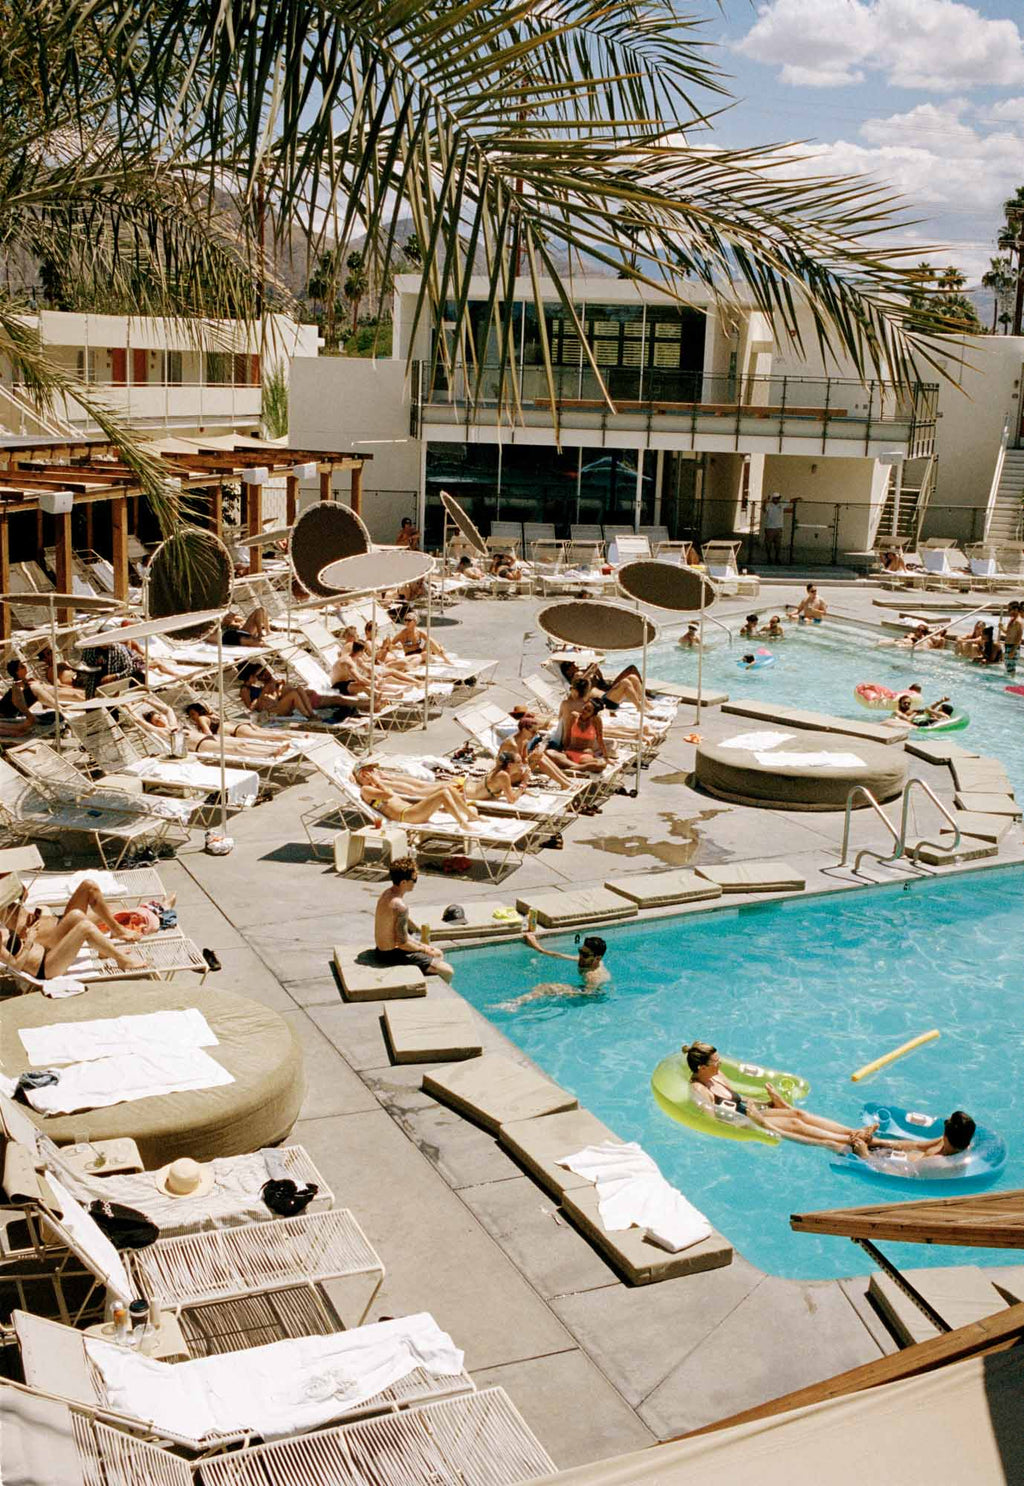 People lay around a 1950’s style Motel swimming pool on a hot day in Palm Springs California. Blue sky with clouds & palm trees.